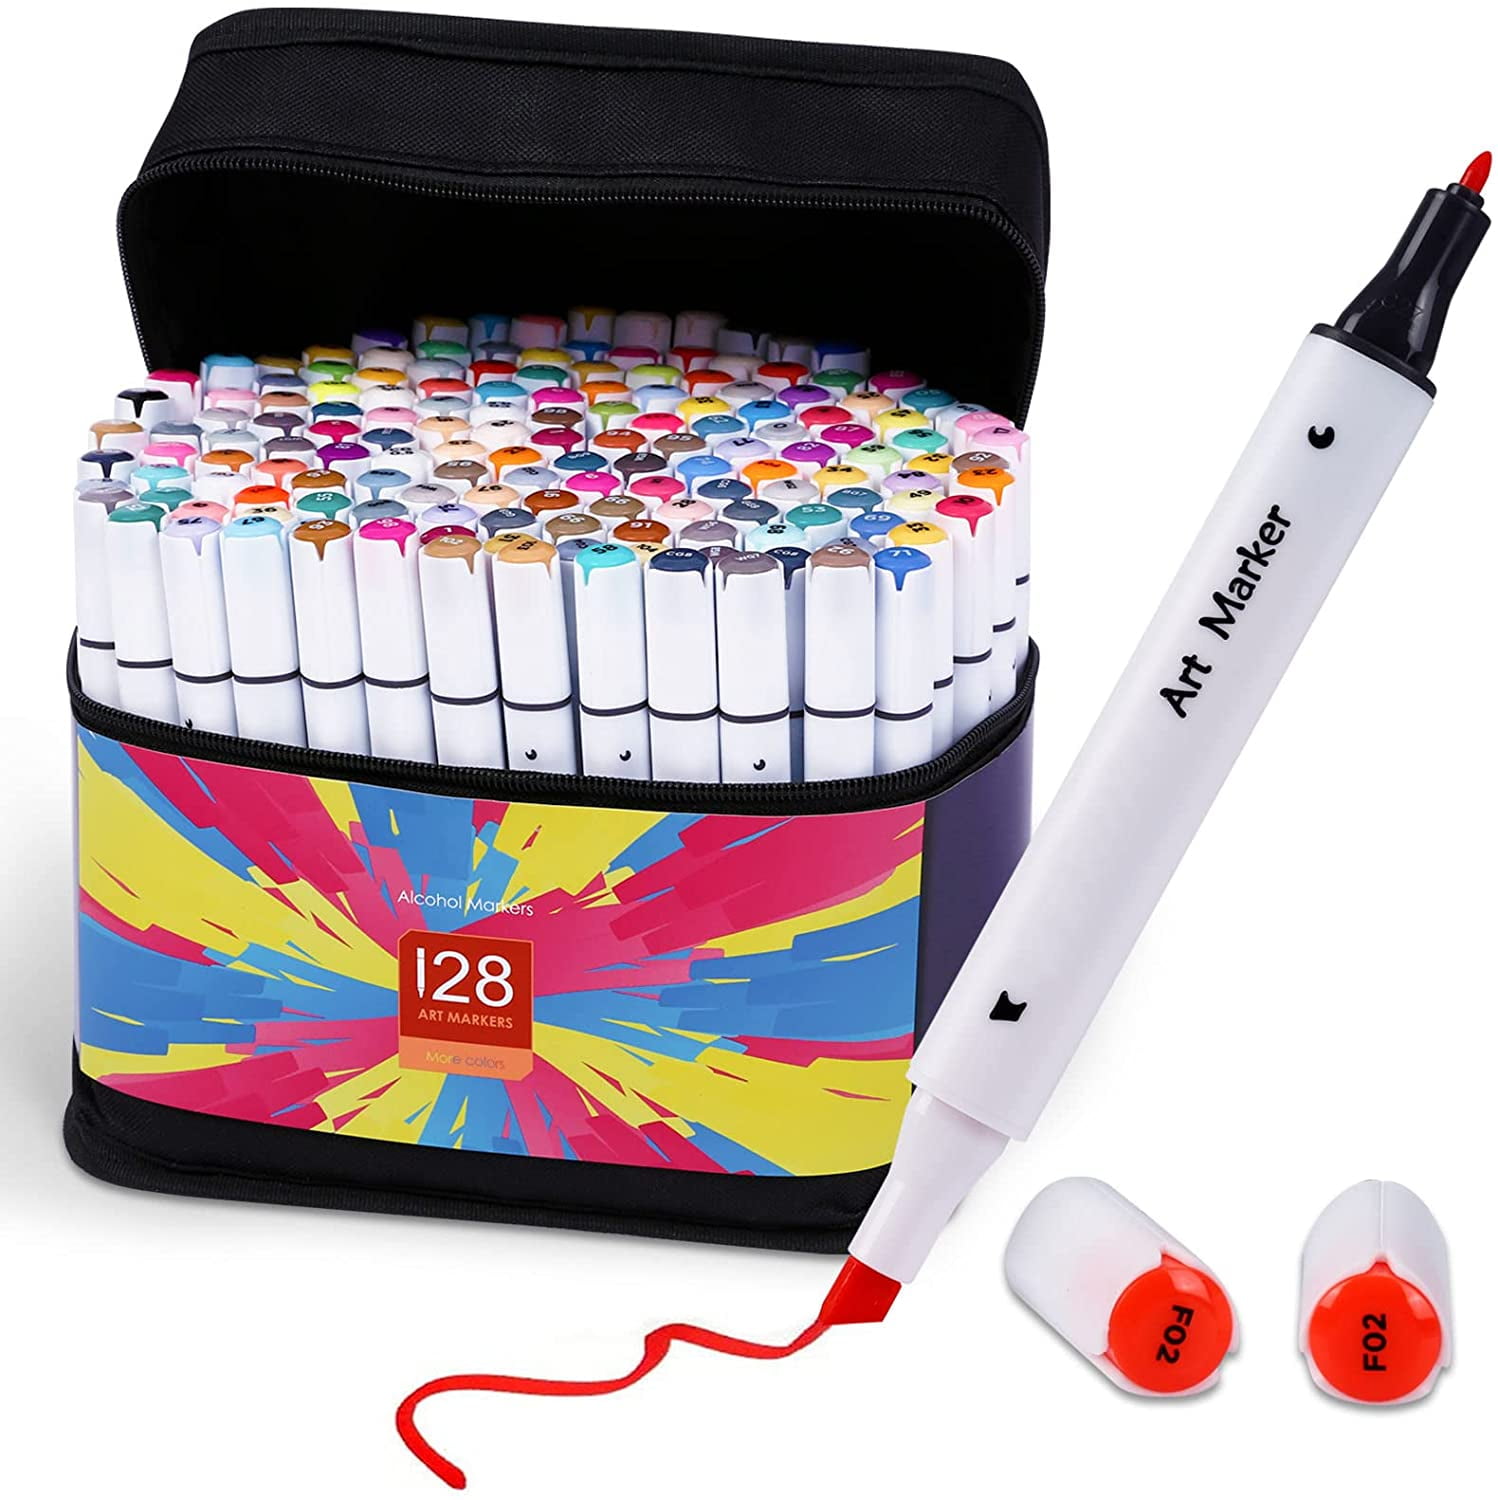 Sketching Highlighting 100 Colours Alcohol Markers Marker Pens with Carrying Case for Artists and Adult Colouring Manga Design Shuttle Art Dual Tip Art Markers Plus 1 Blender Art Pens for Drawing